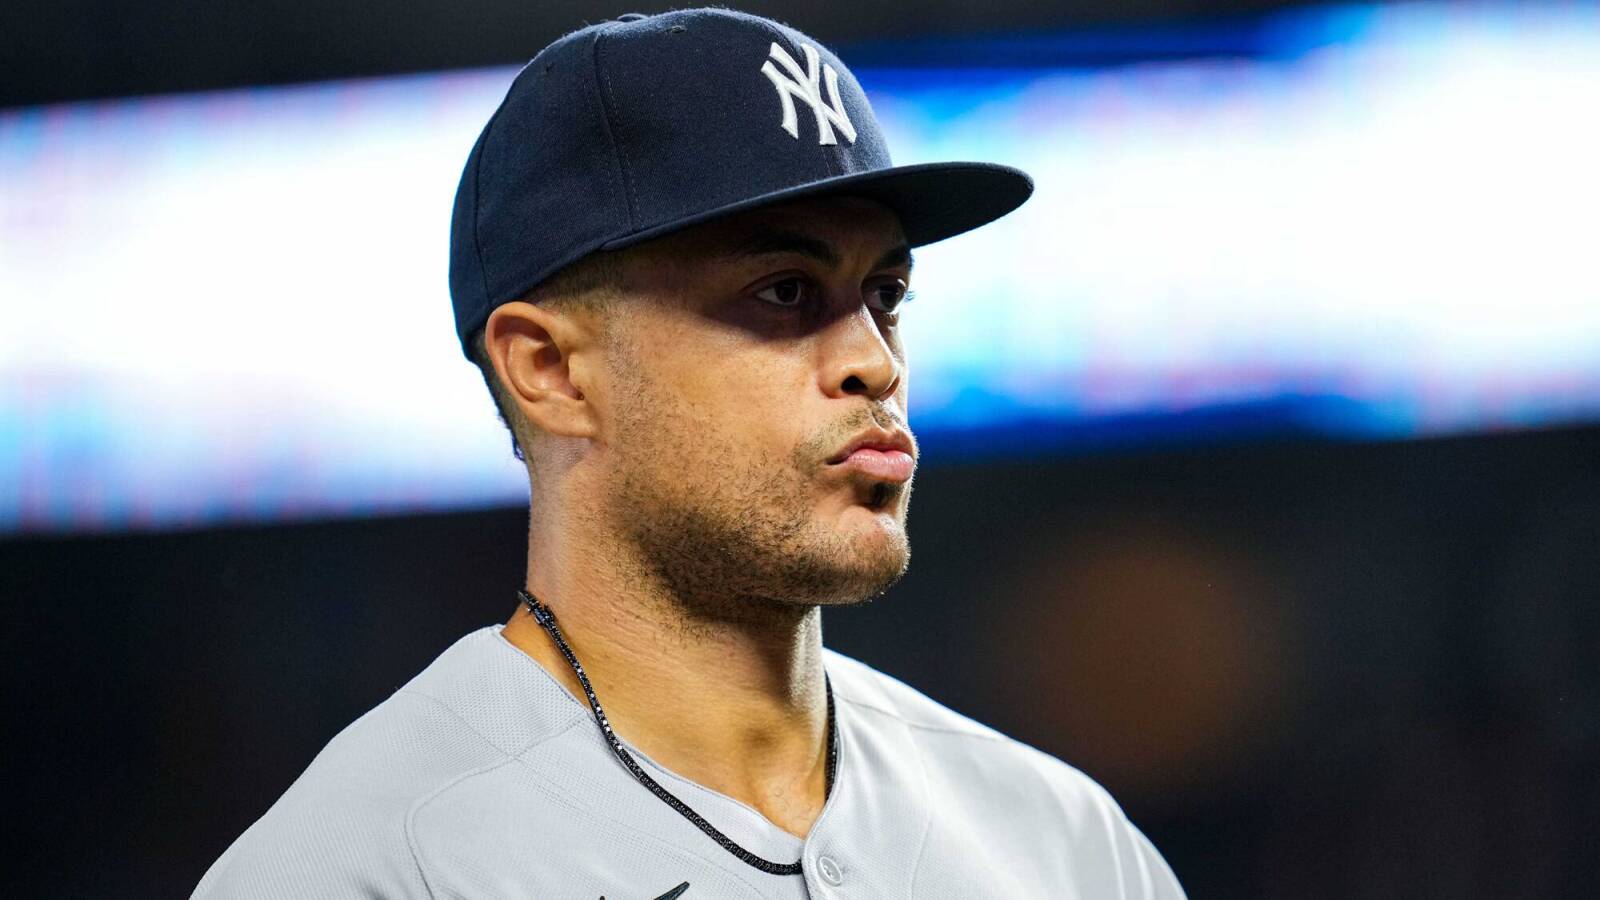 Yankees place OF Giancarlo Stanton on 10-day injured list with calf strain